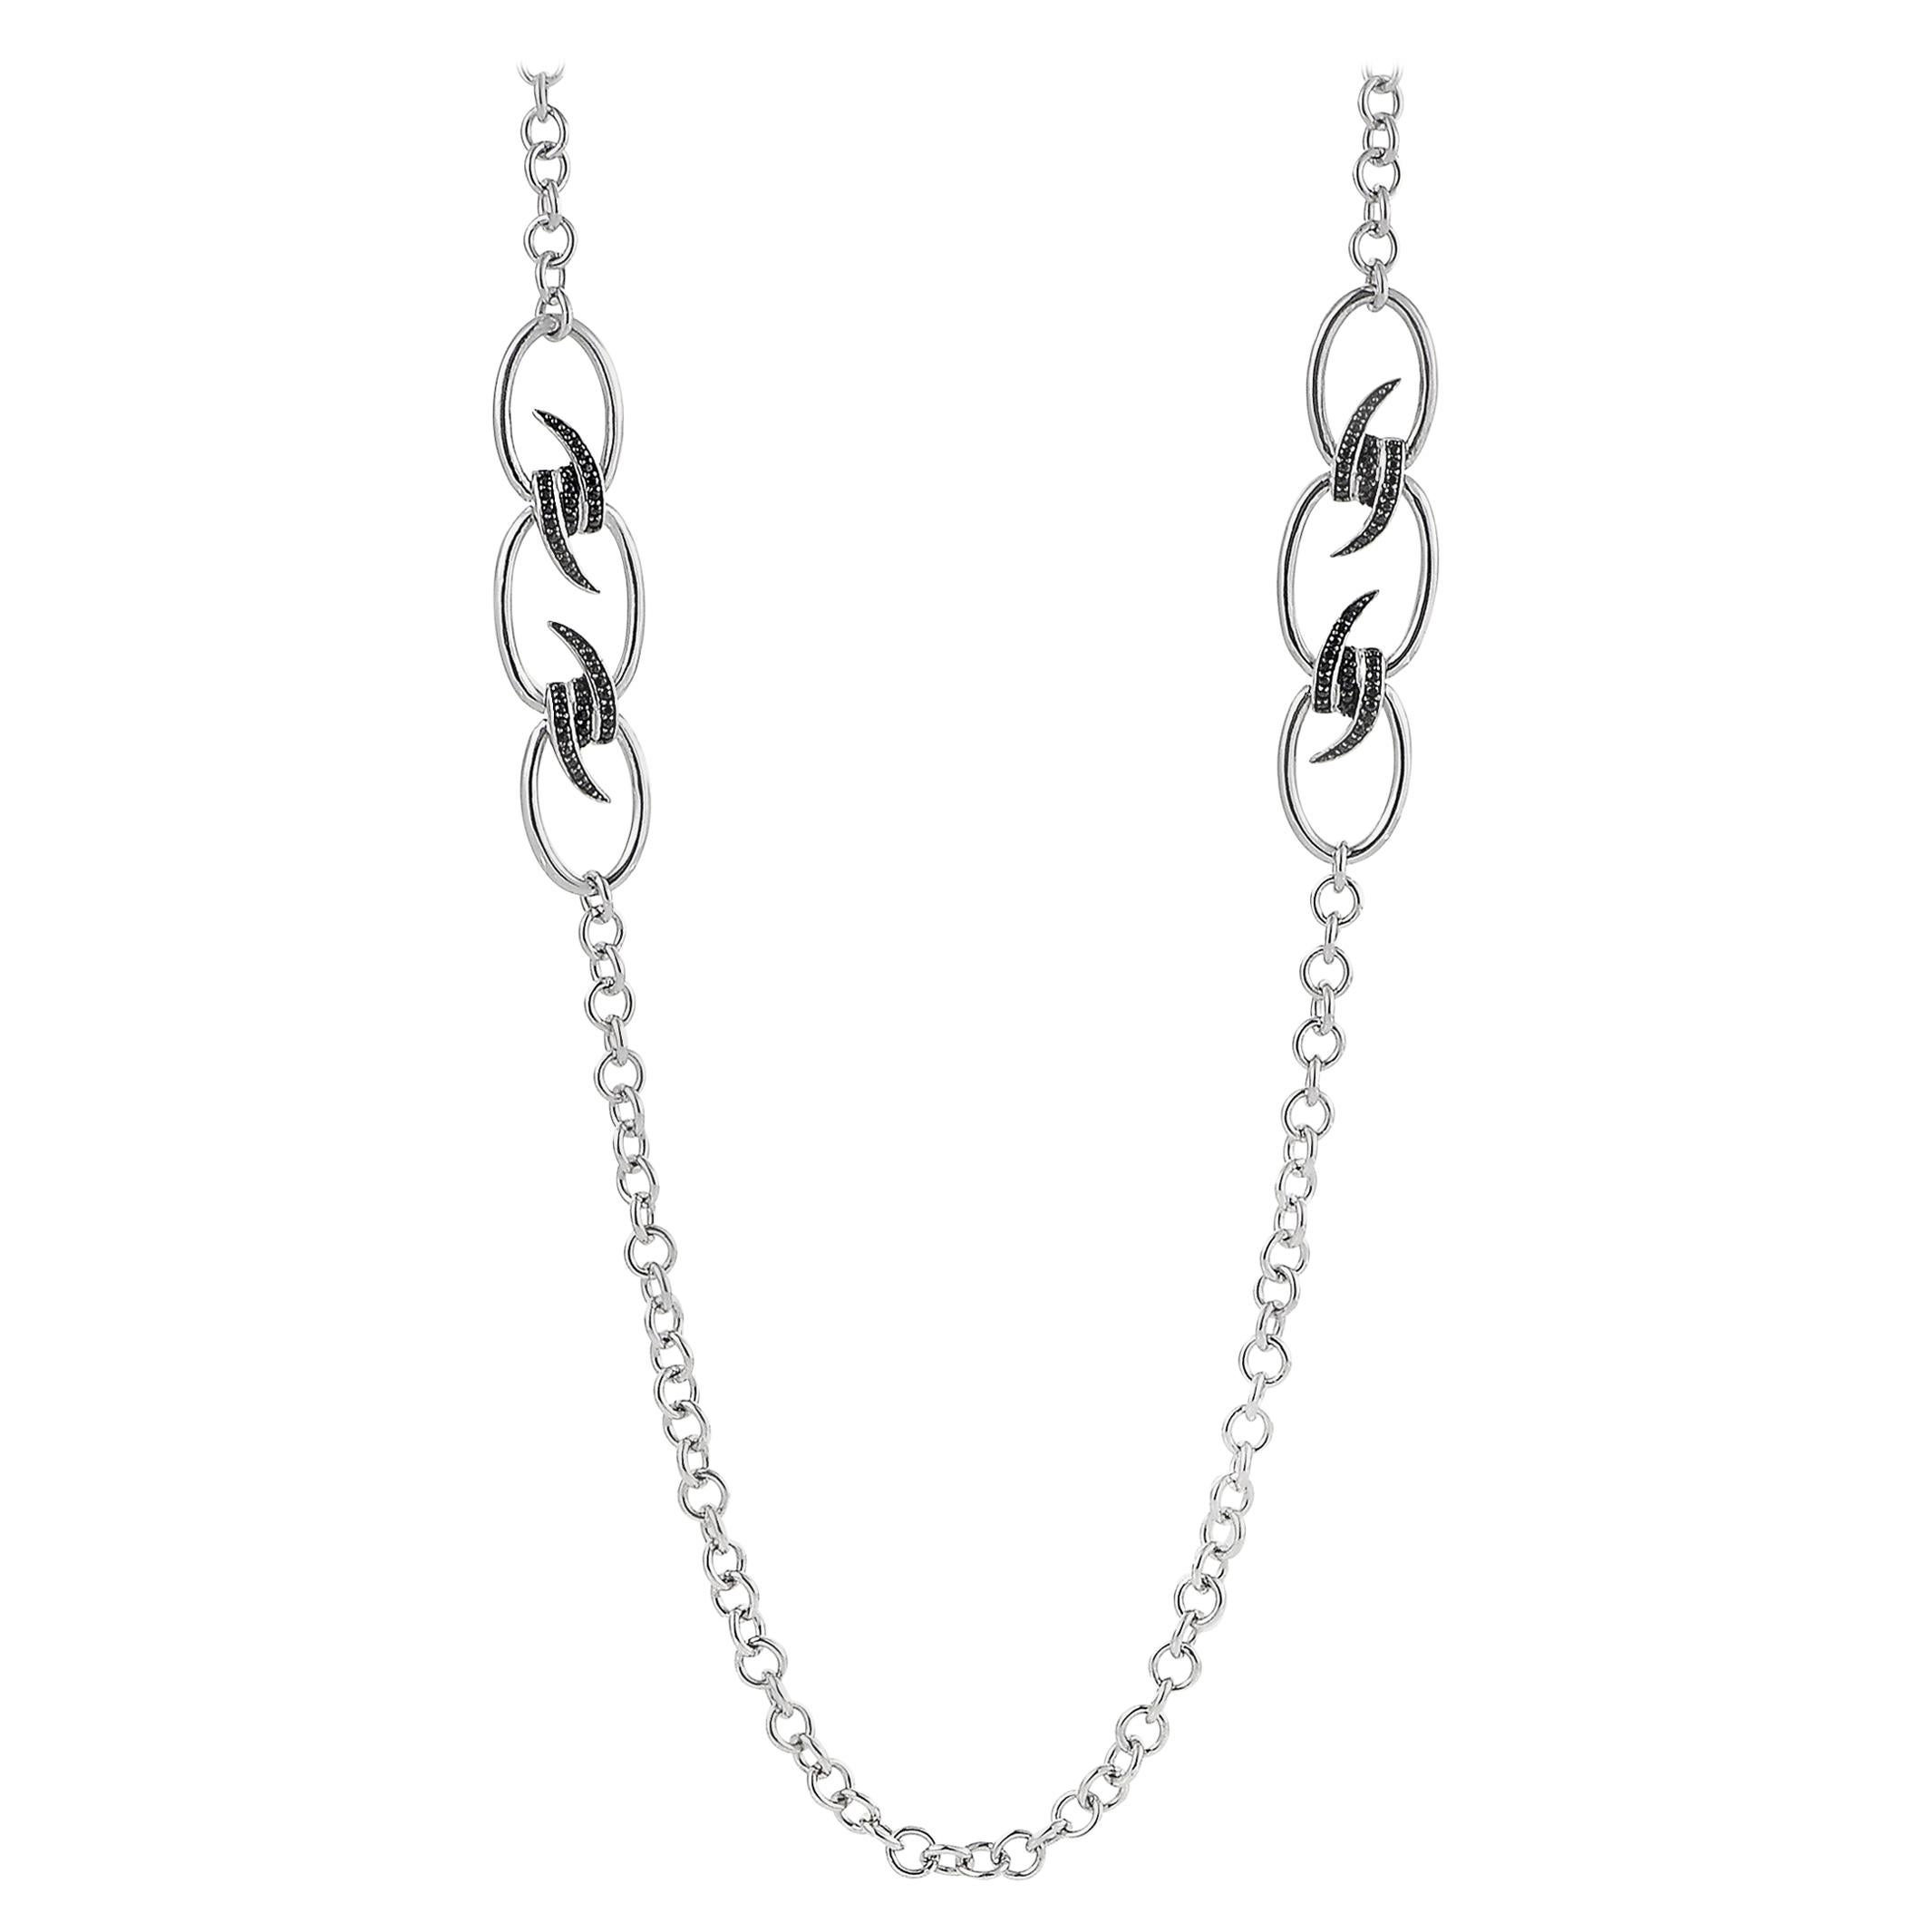 Stephen Webster Forget Me Knot Silver and Black Sapphire Necklace